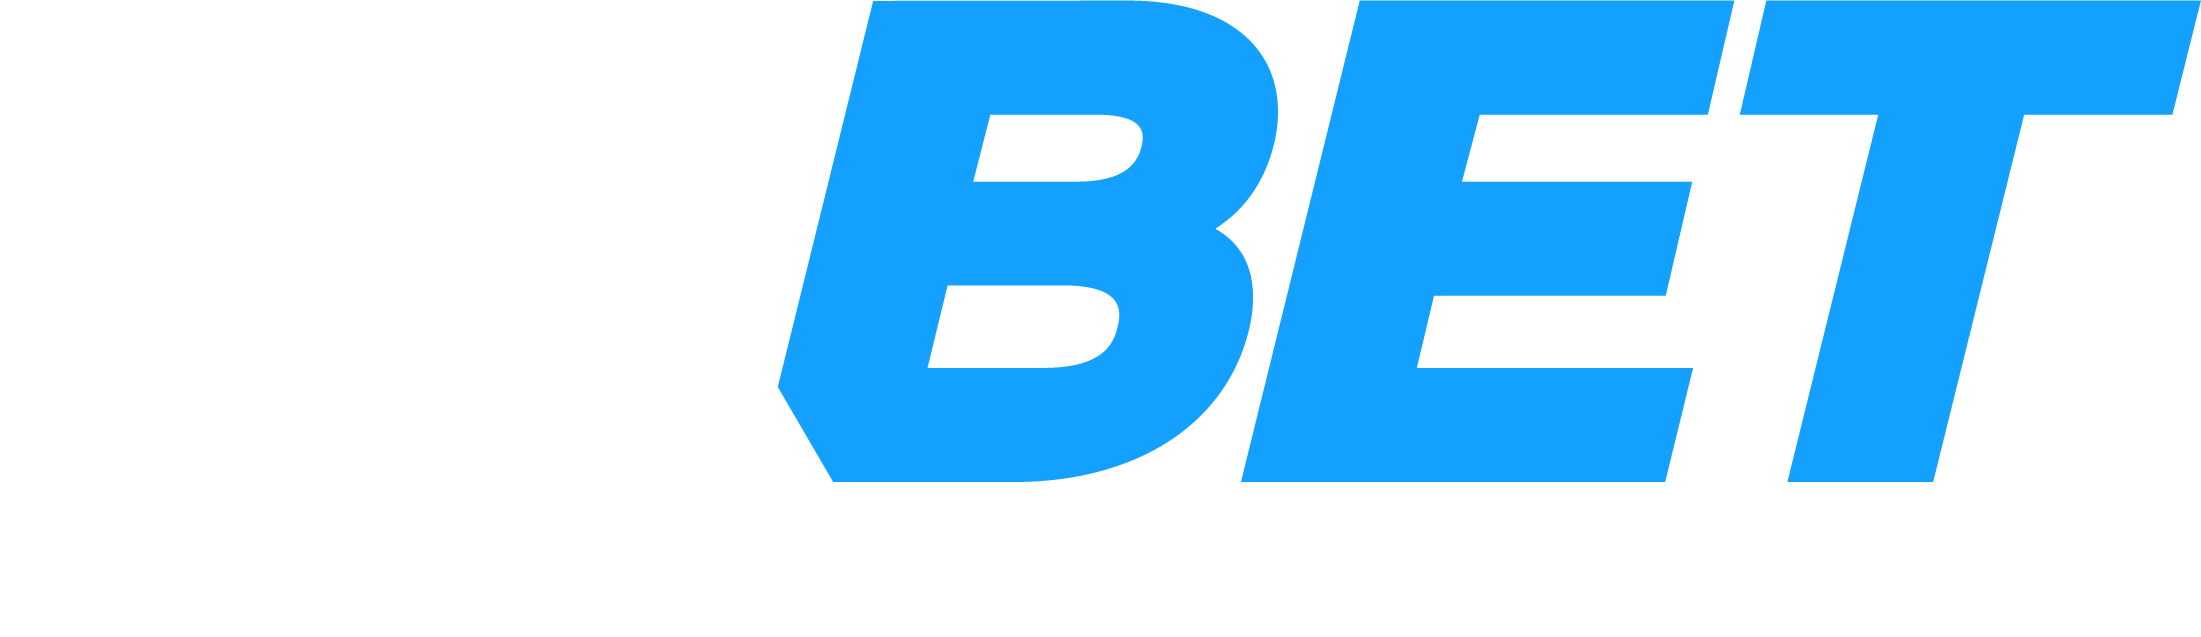 App 1xBet - Android e iOS